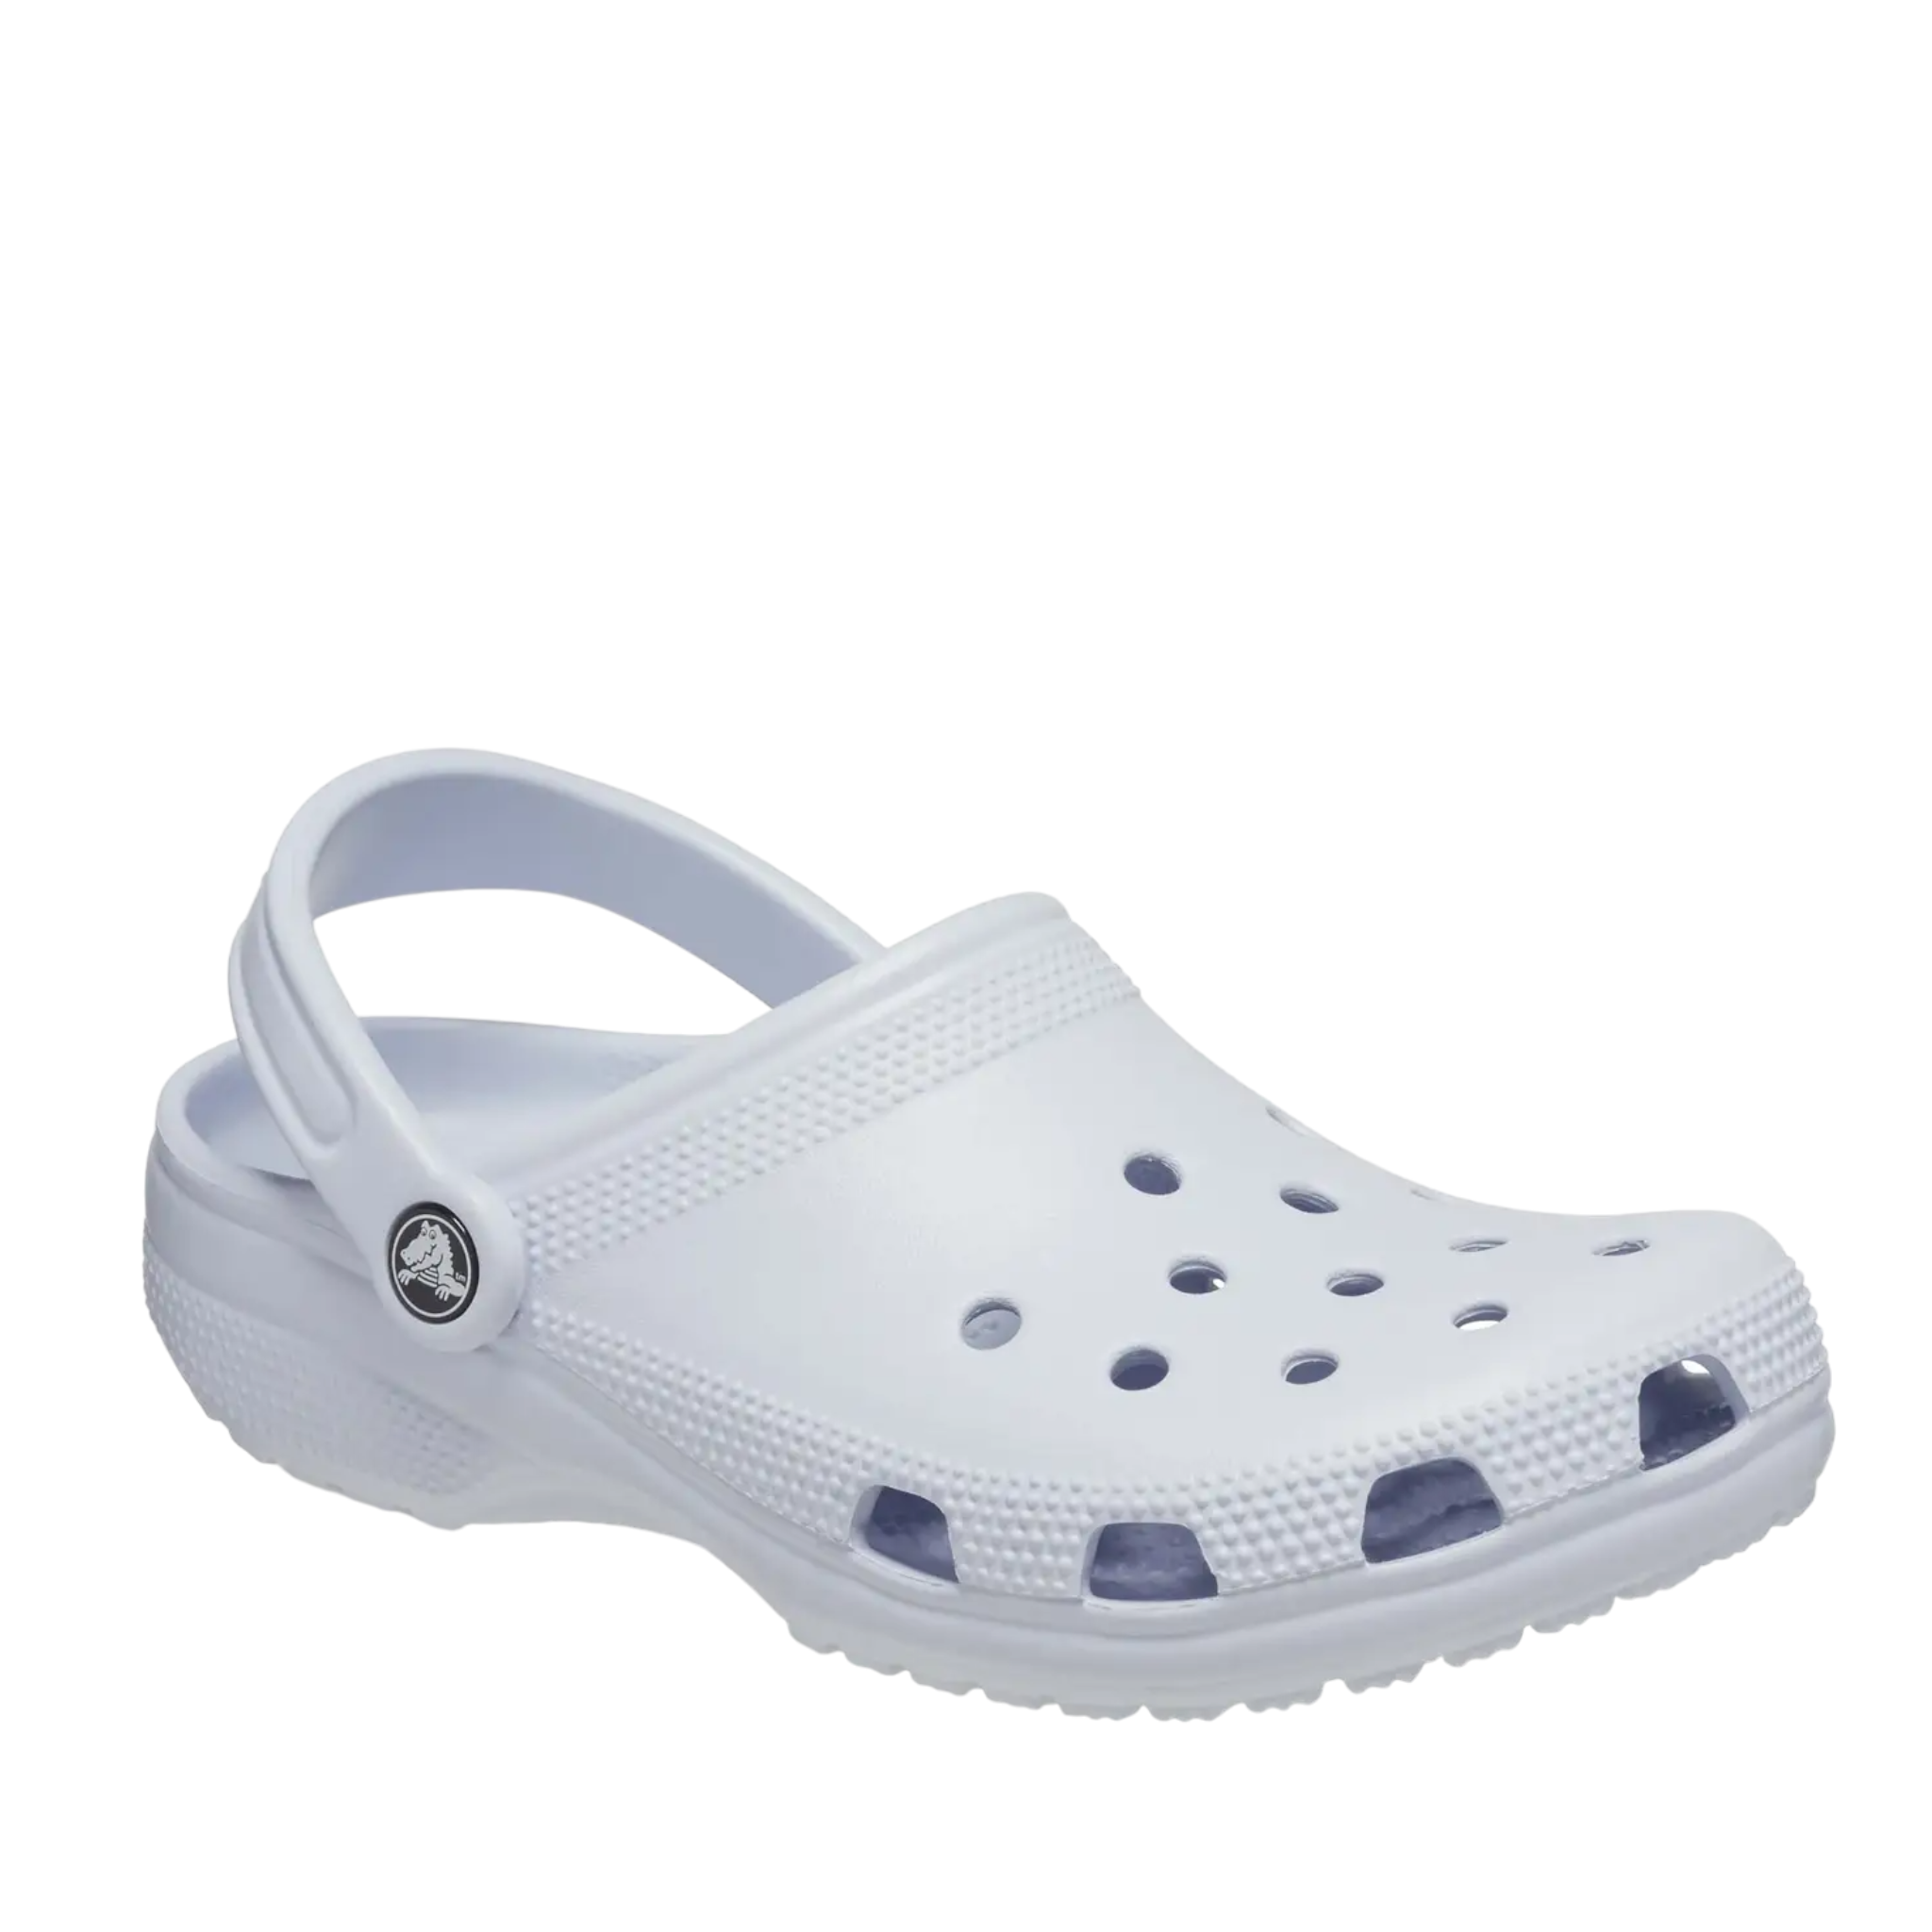 Shop Classic Clog Crocs - with shoe&amp;me - from Crocs - Clogs - Clog, Mens, Summer, Winter, Womens - [collection]